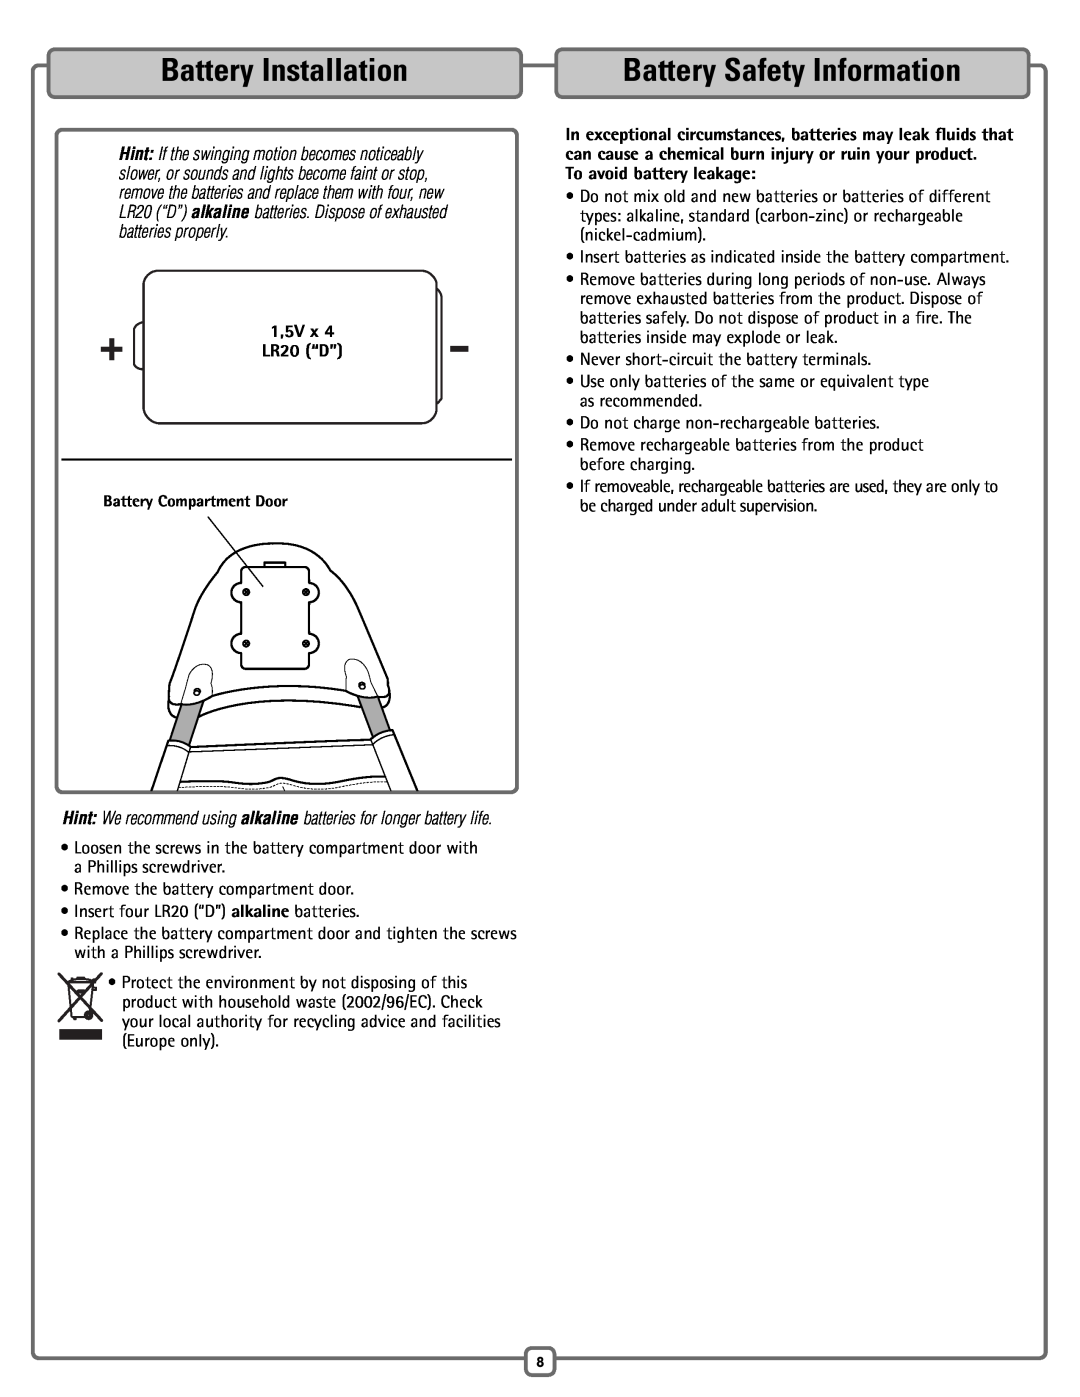 Fisher-Price H7185 manual Battery Installation, Battery Safety Information, 1,5V x LR20 “D”, To avoid battery leakage 